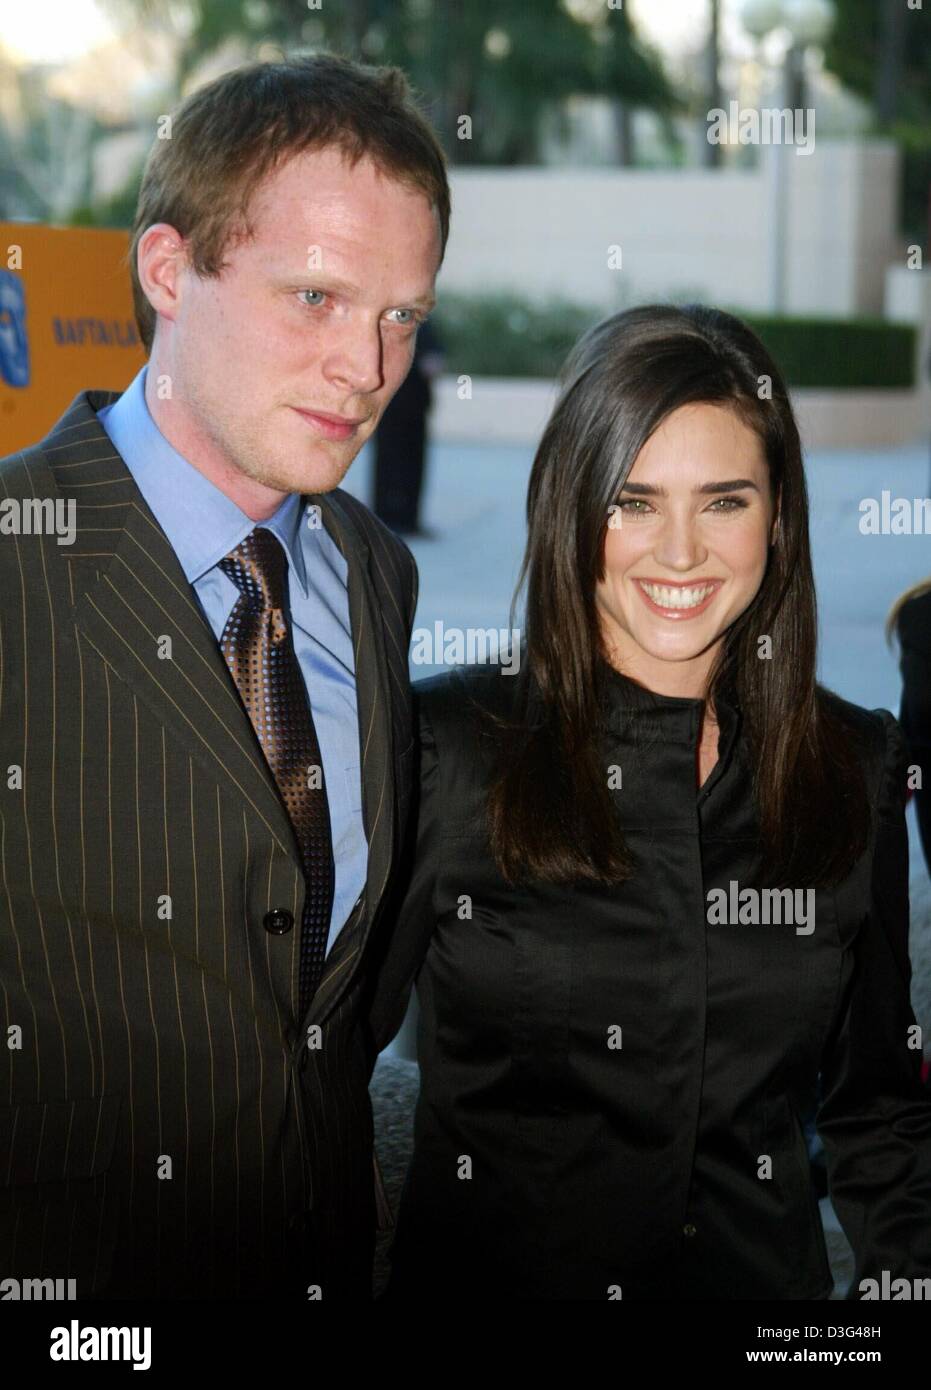 dpa) - Hollywood actress Jennifer Connelly (32) and her newly-wed husband,  actor Paul Bettany (31), arrive to a Tea Party in the Park Hyatt Hotel in  Los Angeles, 18 January 2003. They